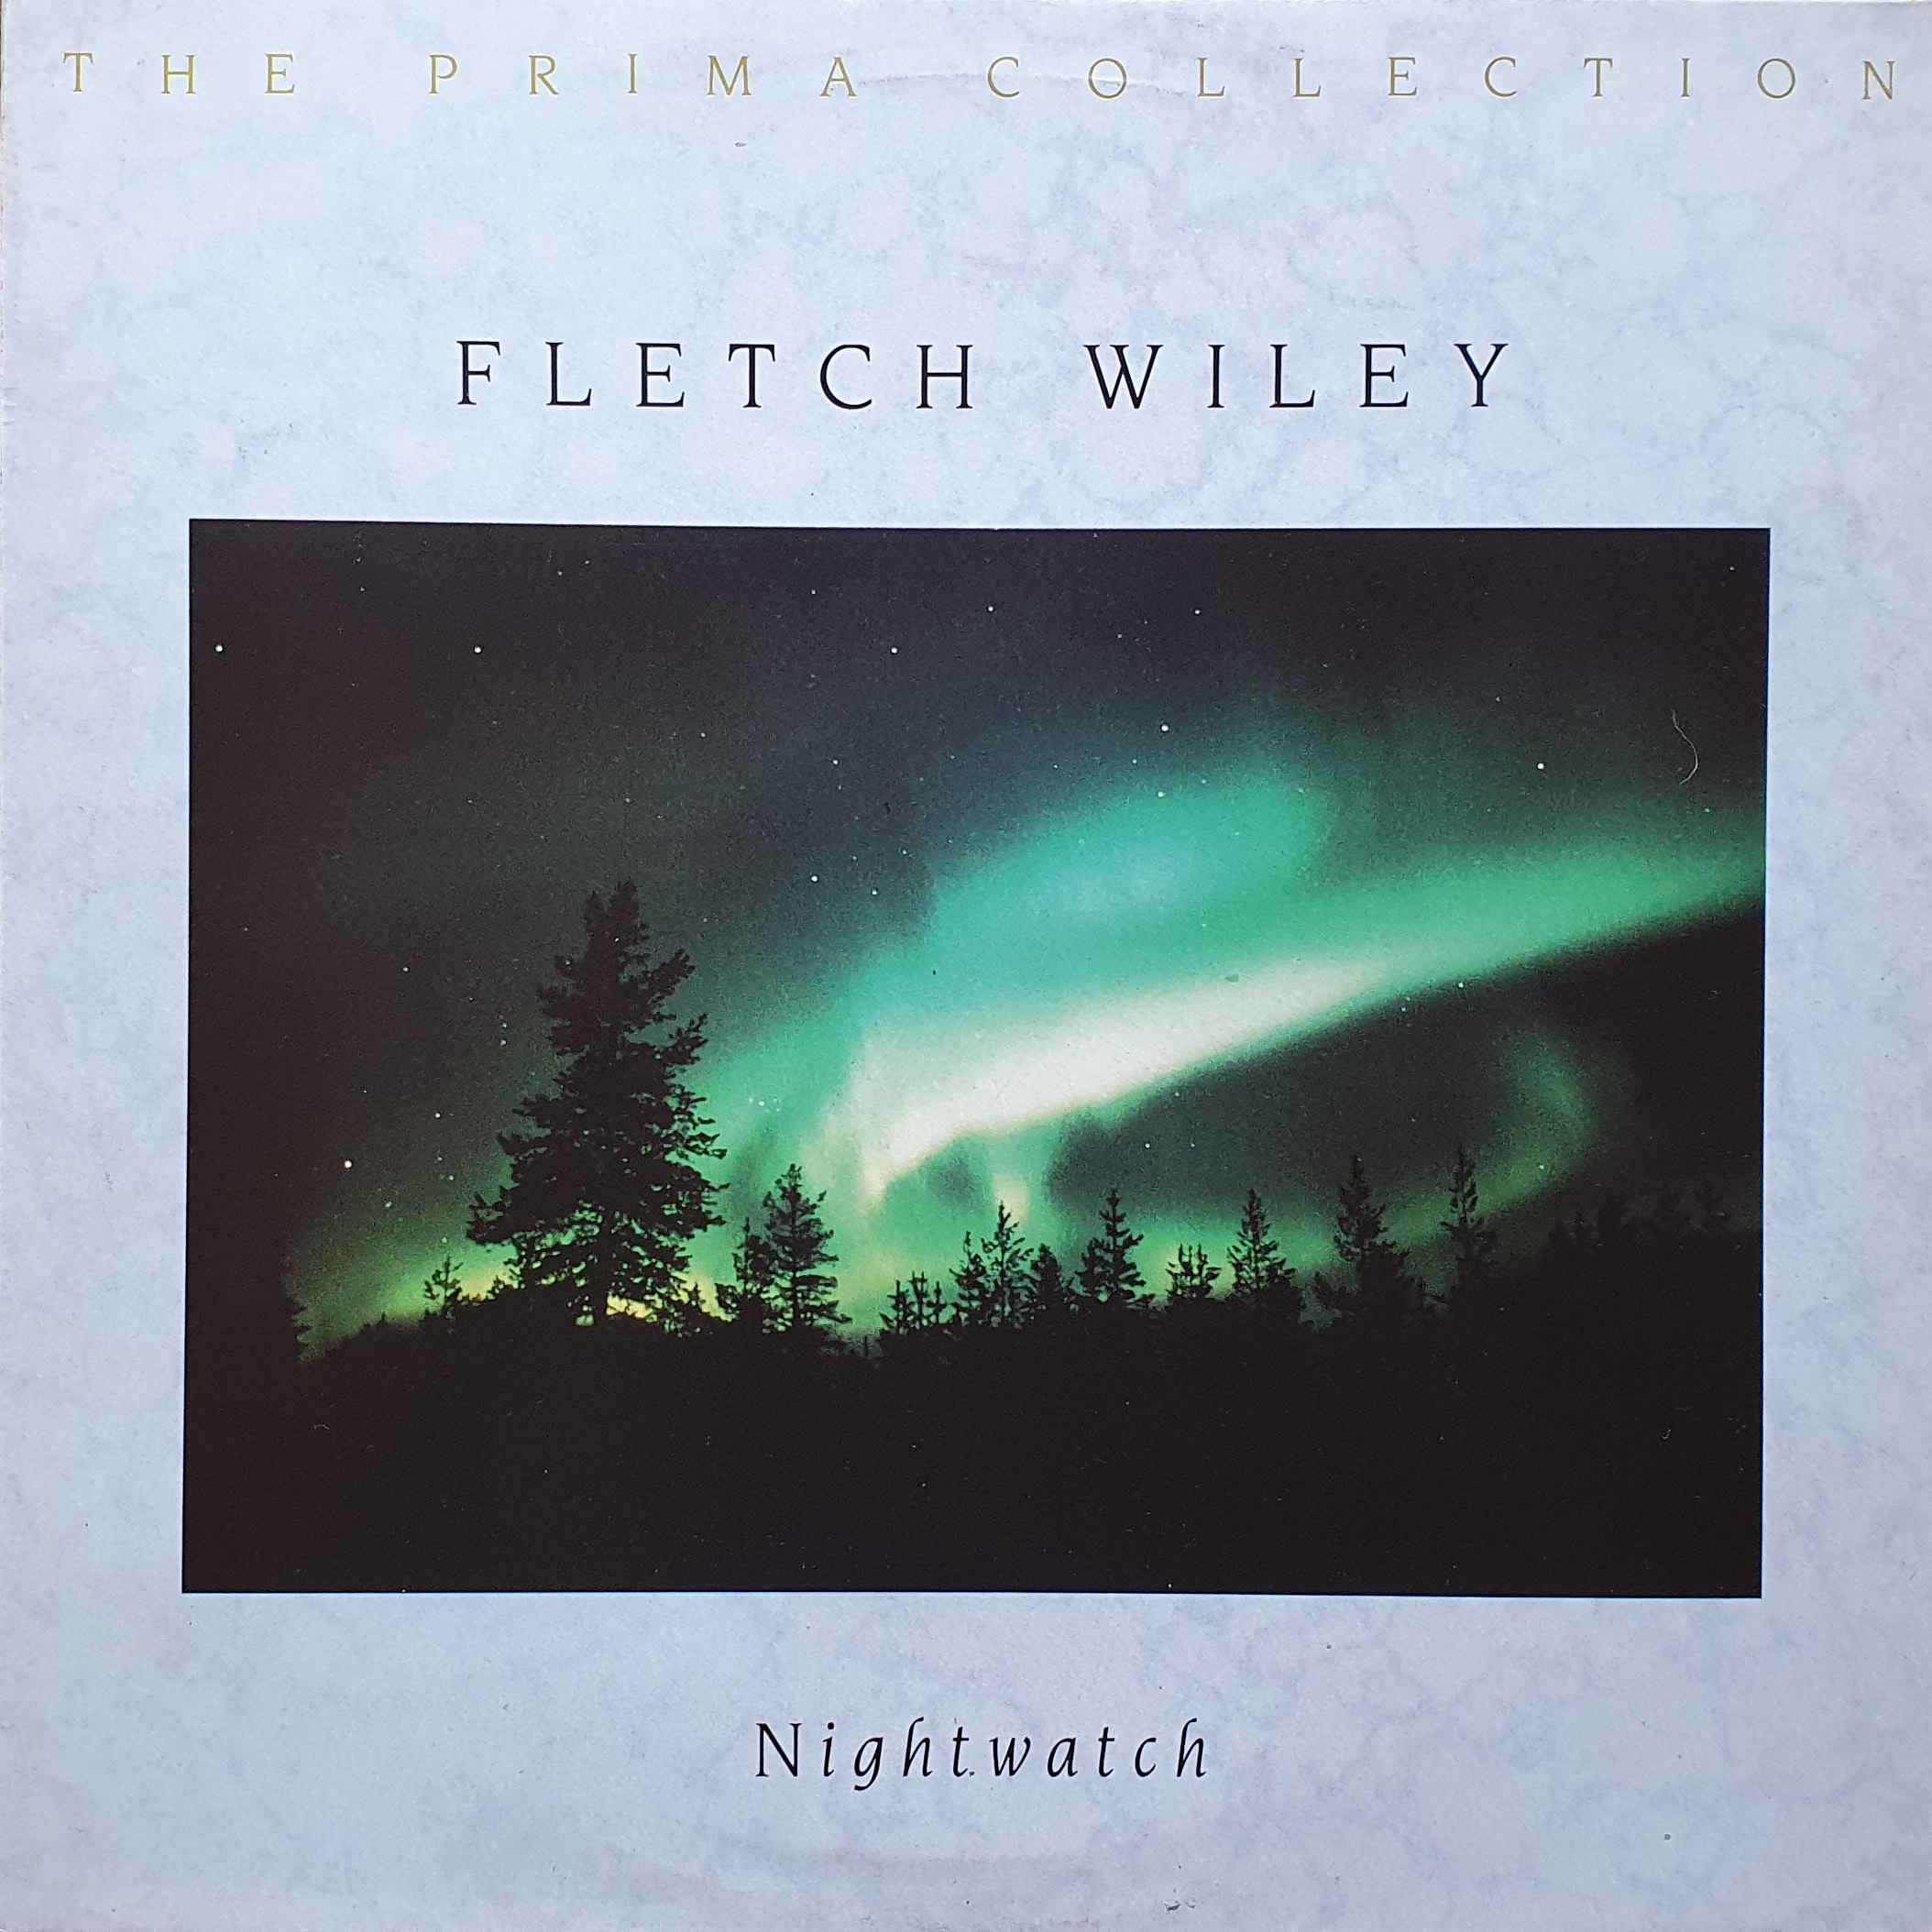 Picture of PRIM 6000 Night watch by artist Fletch Wiley from the BBC albums - Records and Tapes library